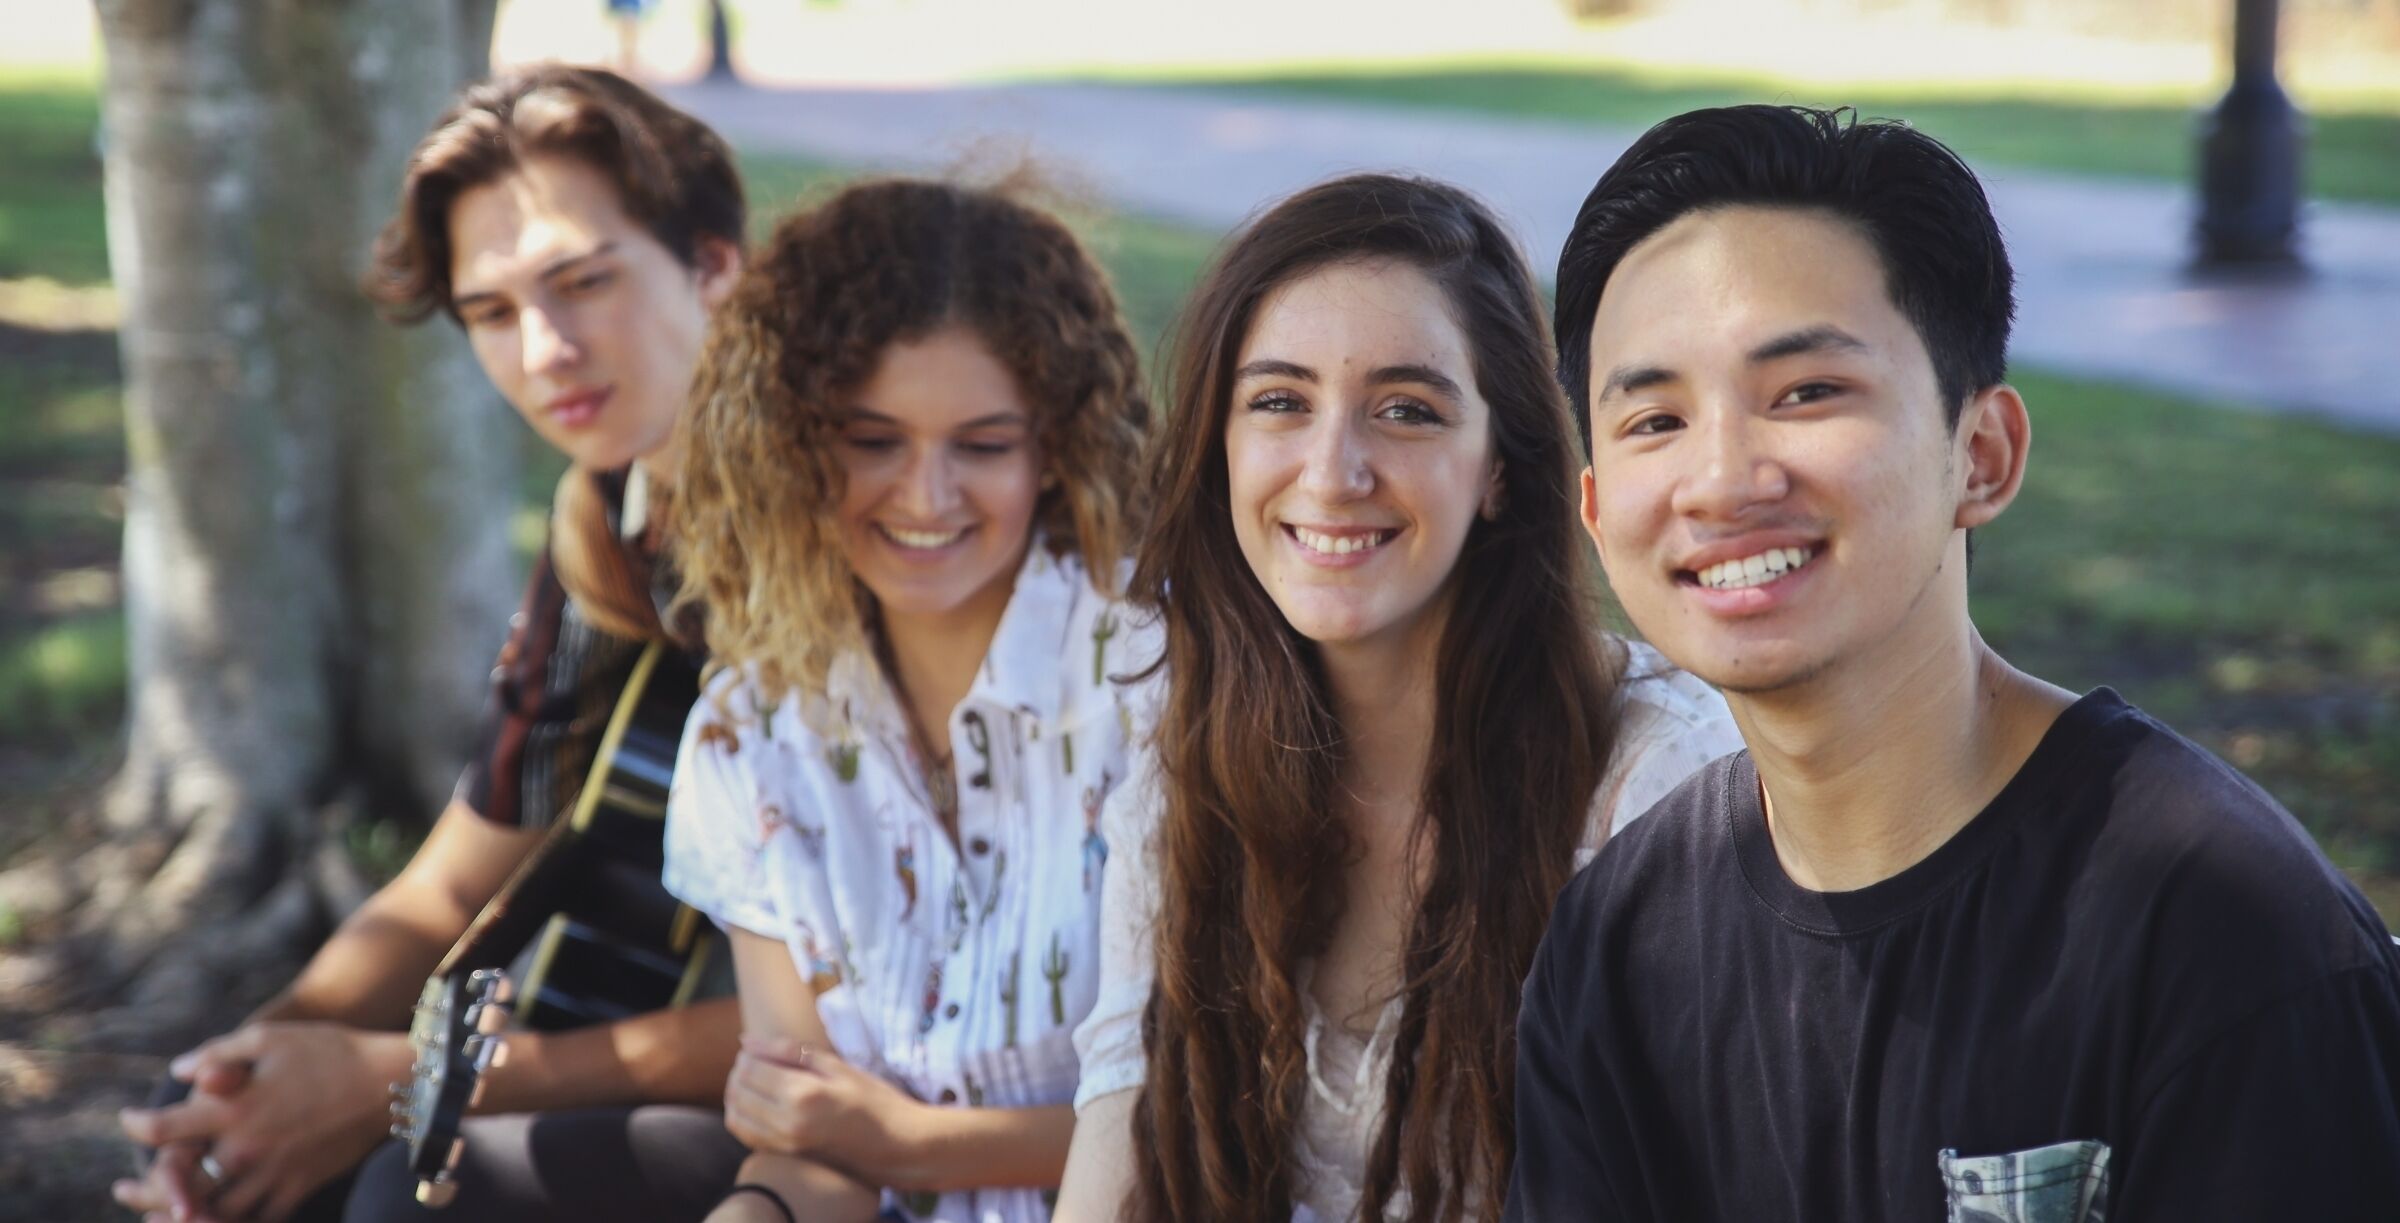 Group of four adolescents smiling